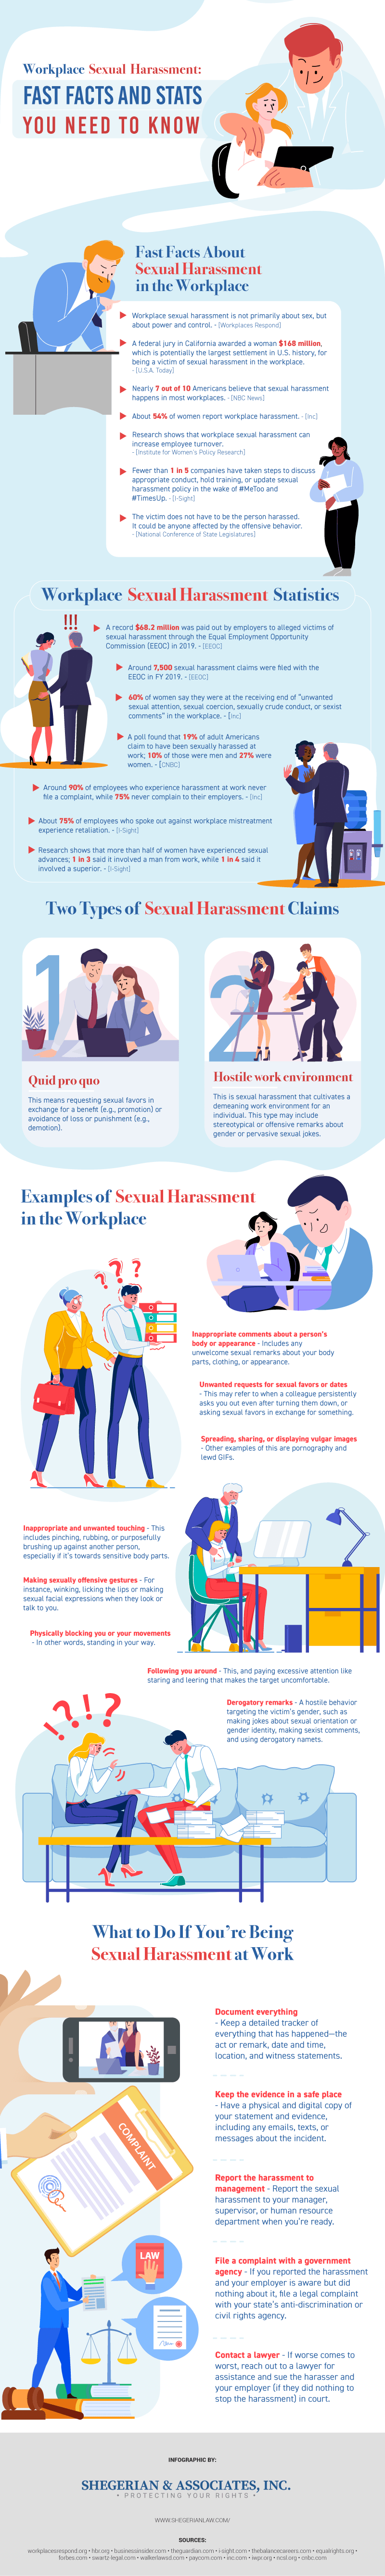 Workplace Sexual Harassment: Fast Facts and Stats You Need to Know